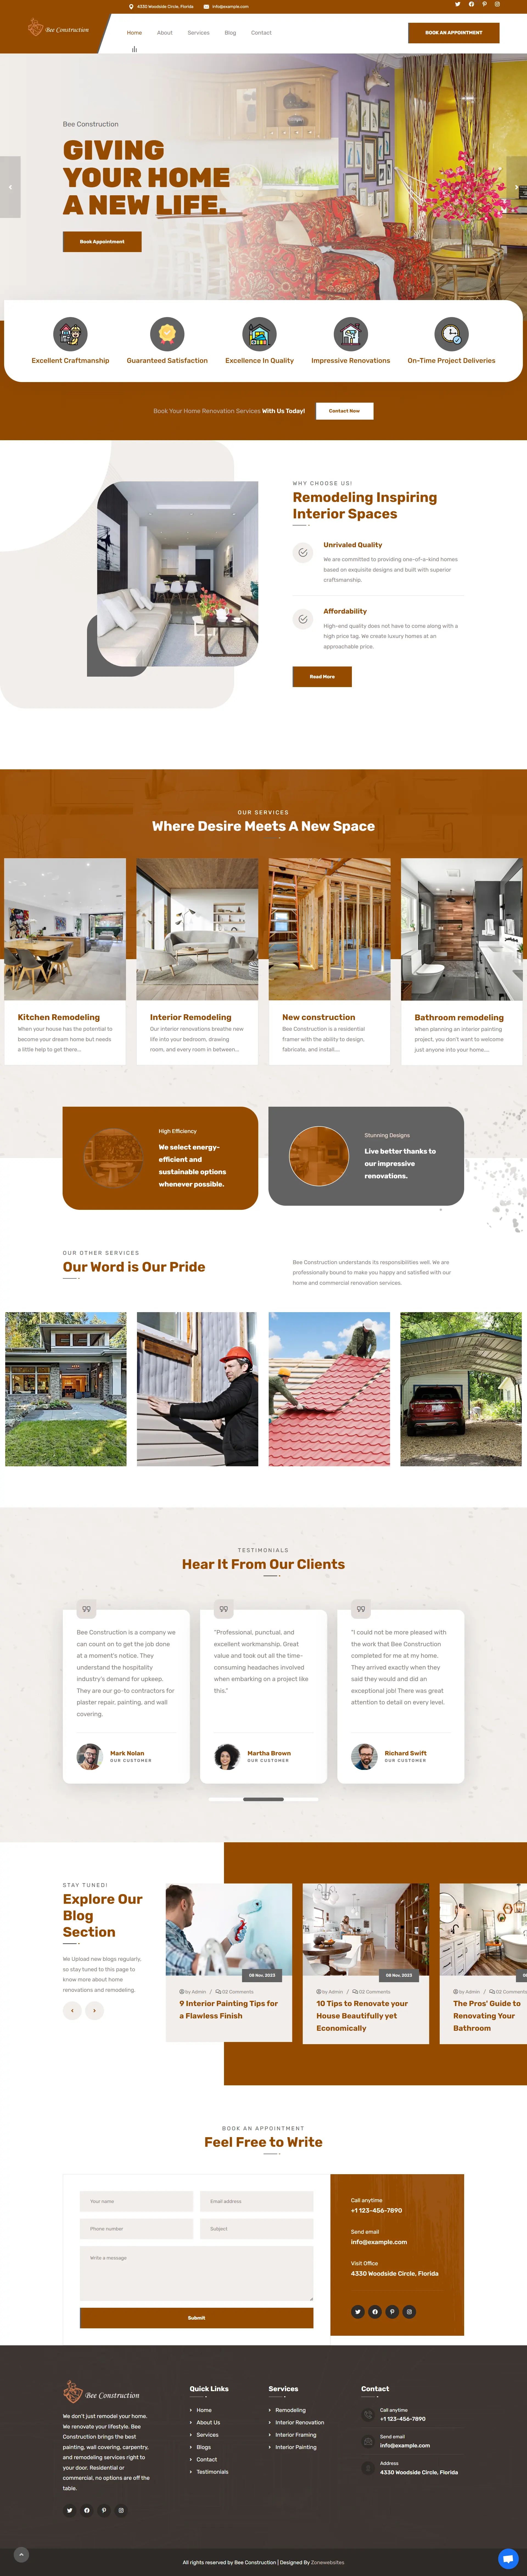 Home and Commercial Renovation Services Website Theme